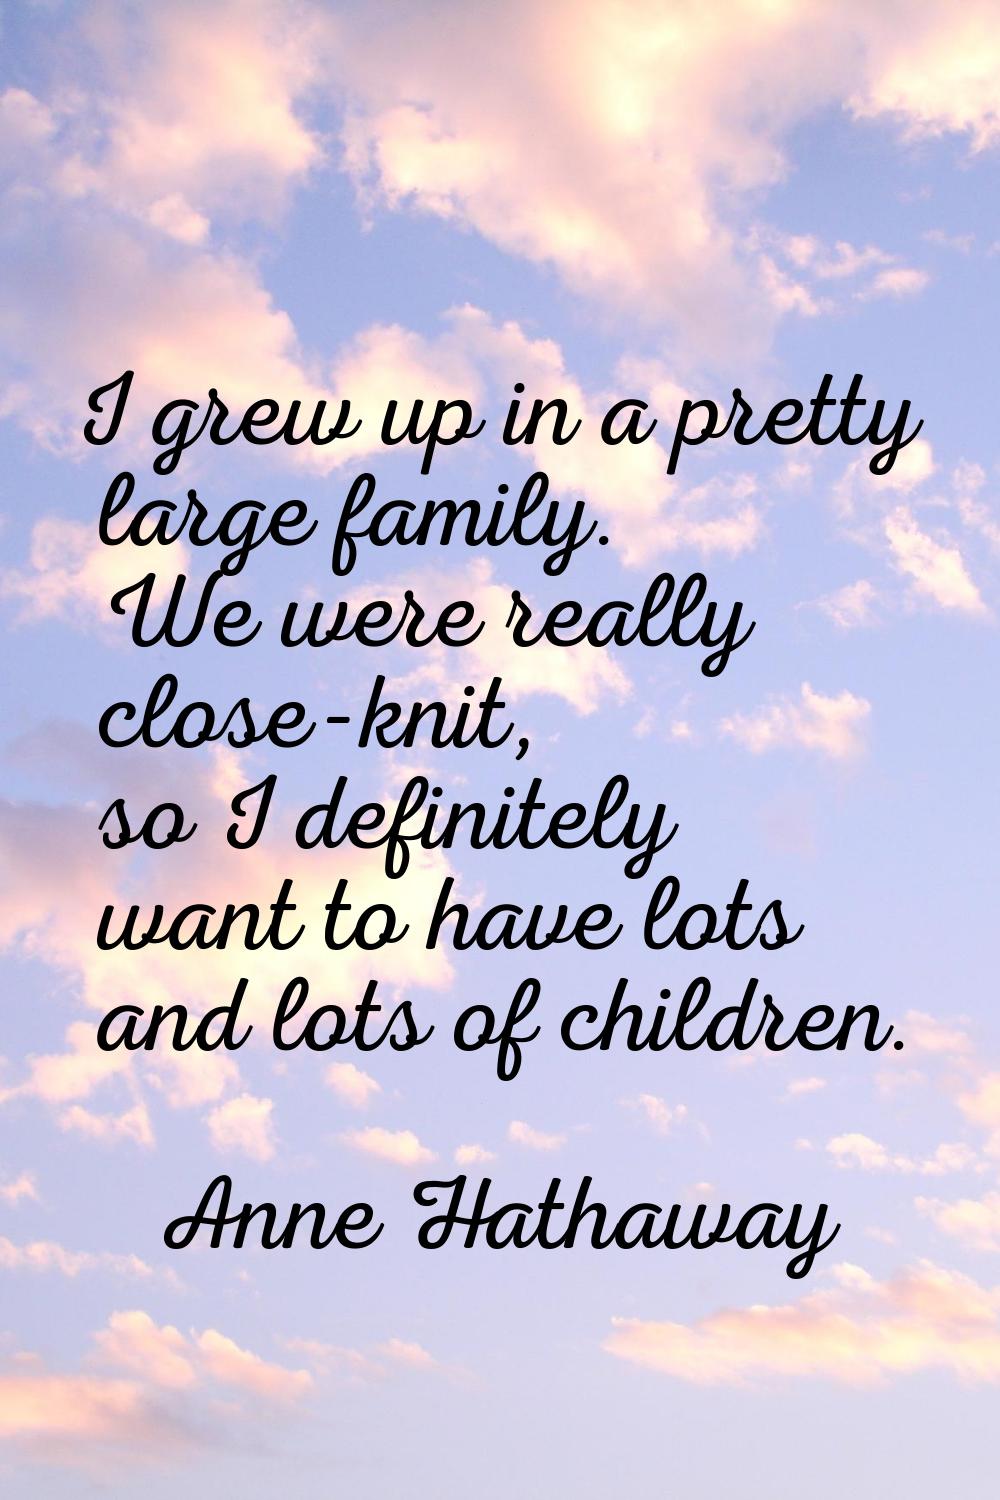 I grew up in a pretty large family. We were really close-knit, so I definitely want to have lots an